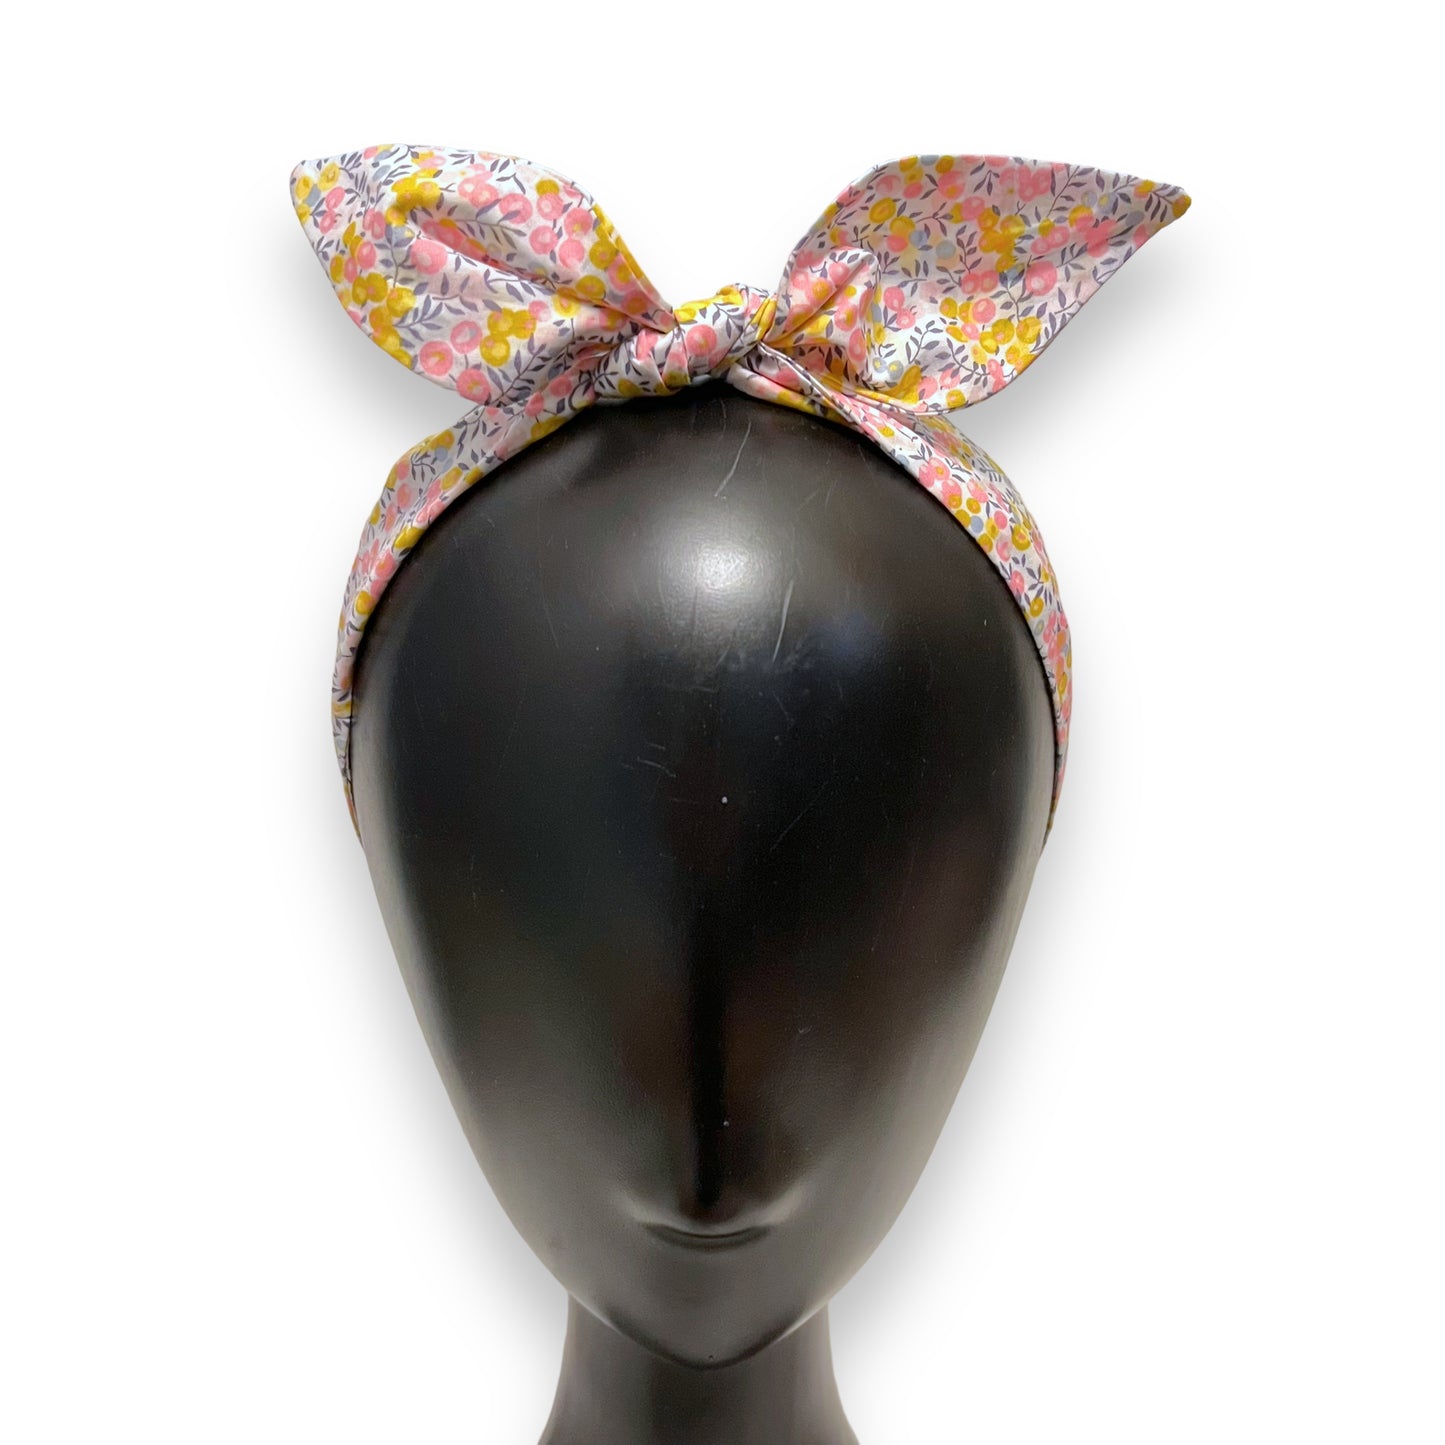 Soft Knotted Hairband - Liberty Wiltshire Bud Pink